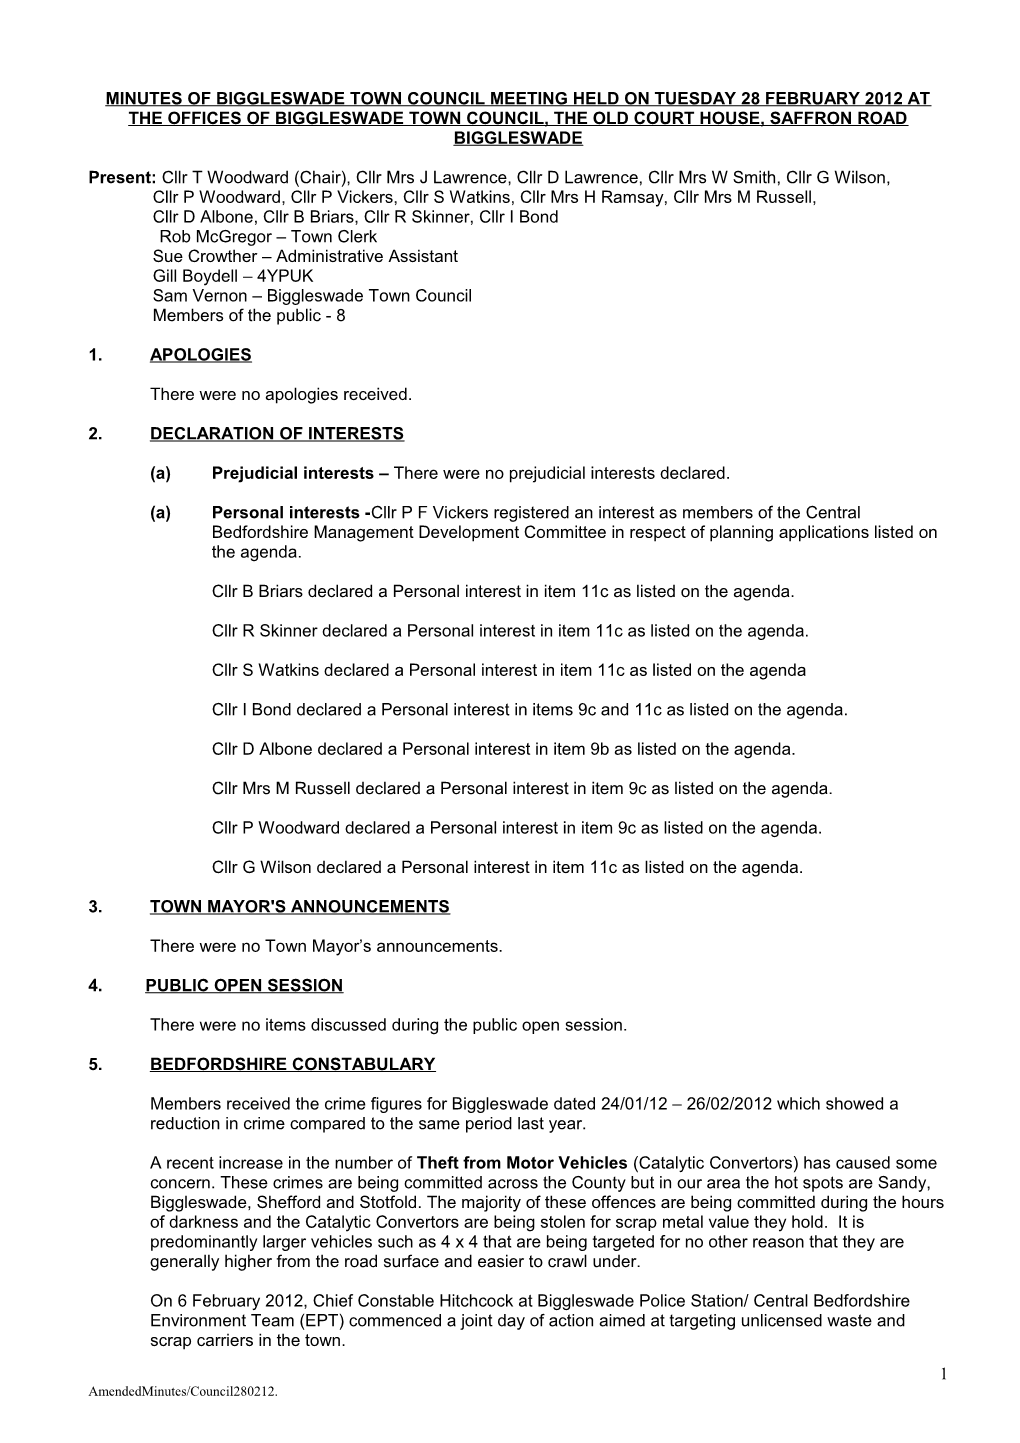 MINUTES of BIGGLESWADE TOWN COUNCIL MEETING HELD on TUESDAY 27Th FEBRUARY 2007 at the OFFICES